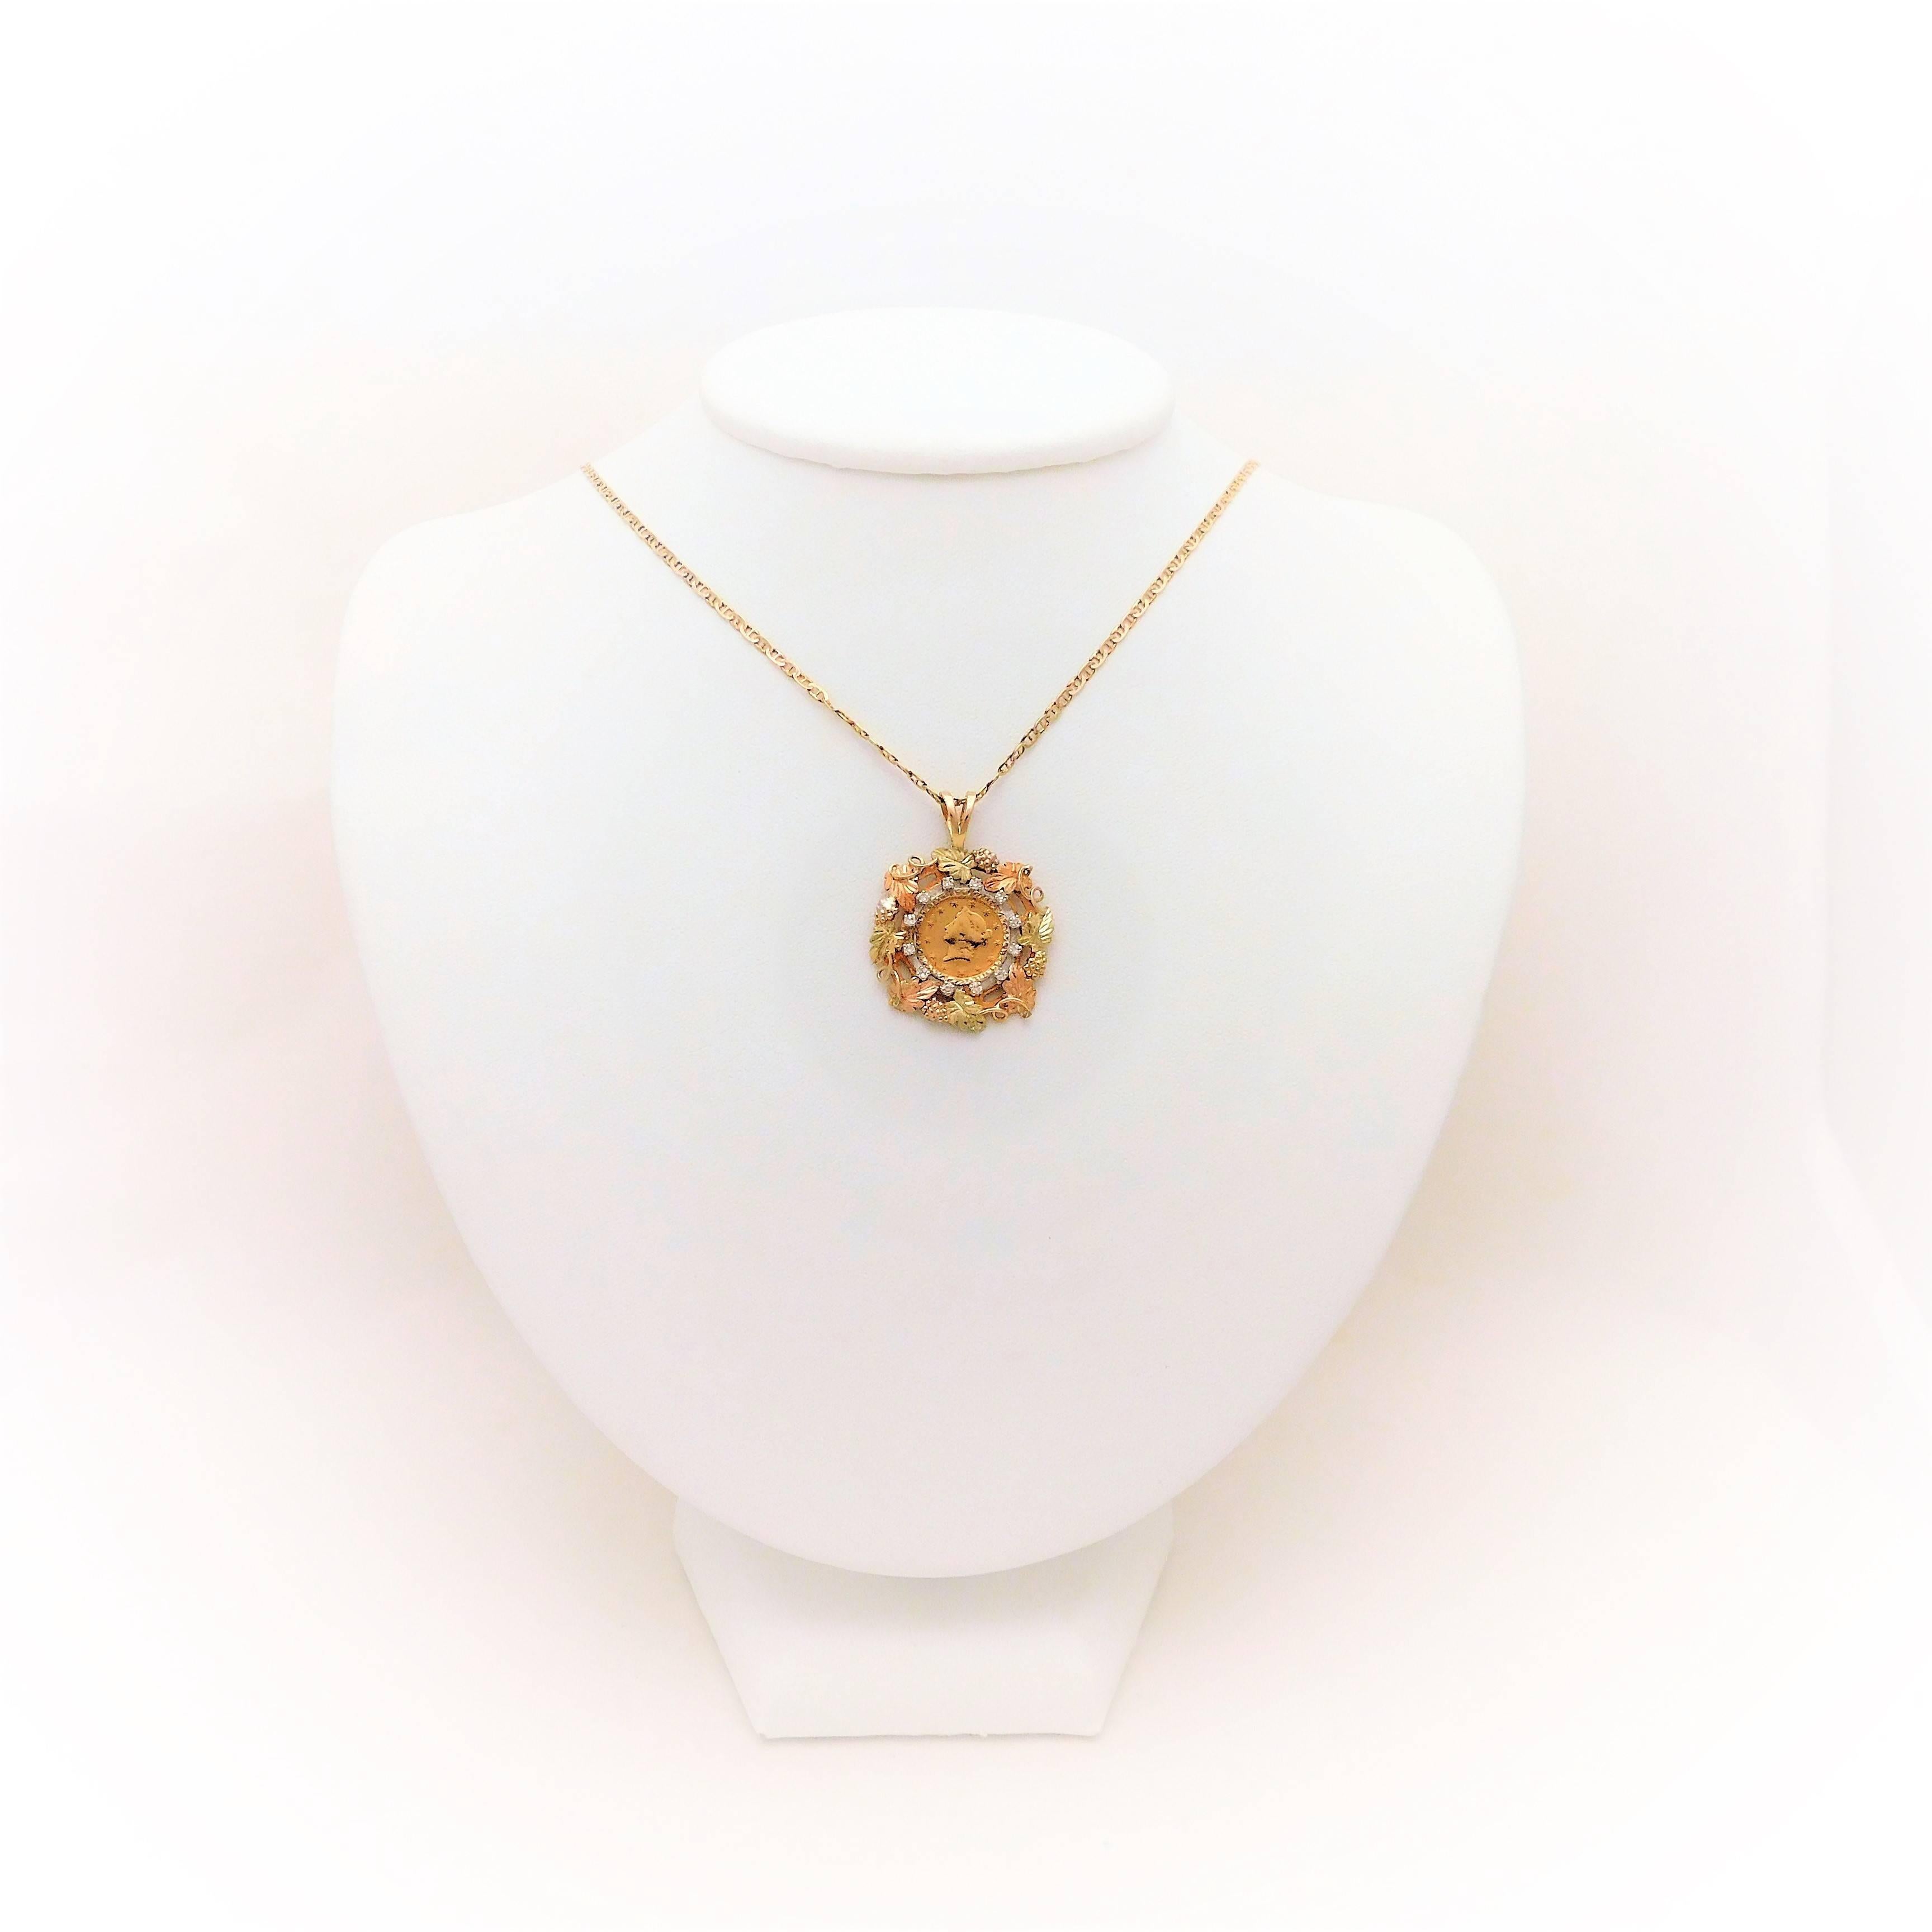 Acquired in an ornate Southern estate.  This one-of-a-kind pendant has been hand crafted in solid 14k gold.  It has been masterfully jeweled with an 1851 US Gold Dollar Coin as its center piece.  This antique circulated coin is made of 0.9000 gold. 